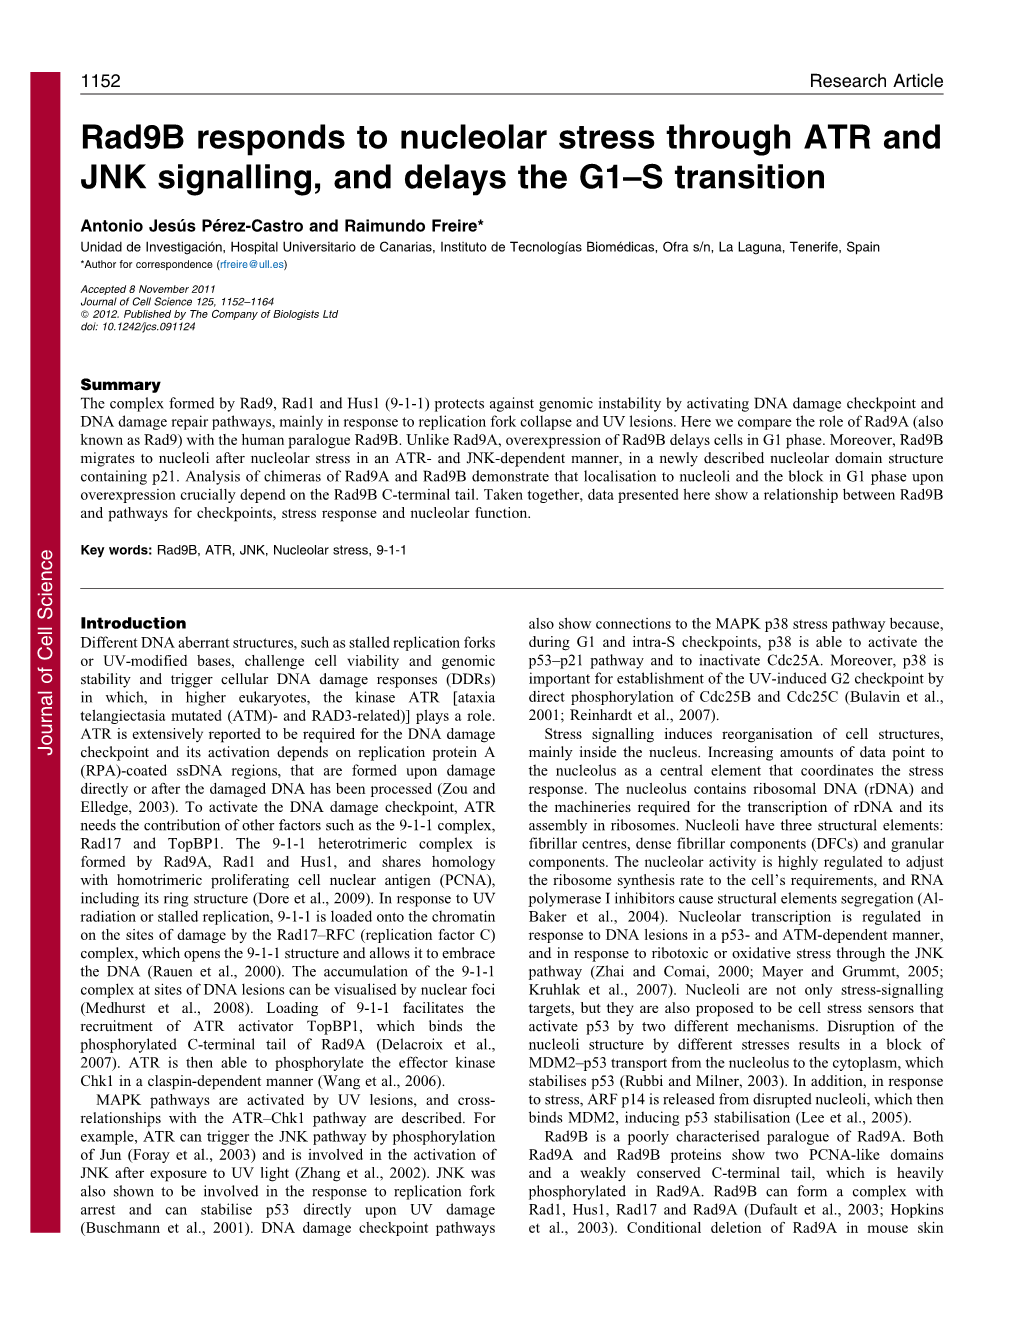 Rad9b Responds to Nucleolar Stress Through ATR and JNK Signalling, and Delays the G1–S Transition